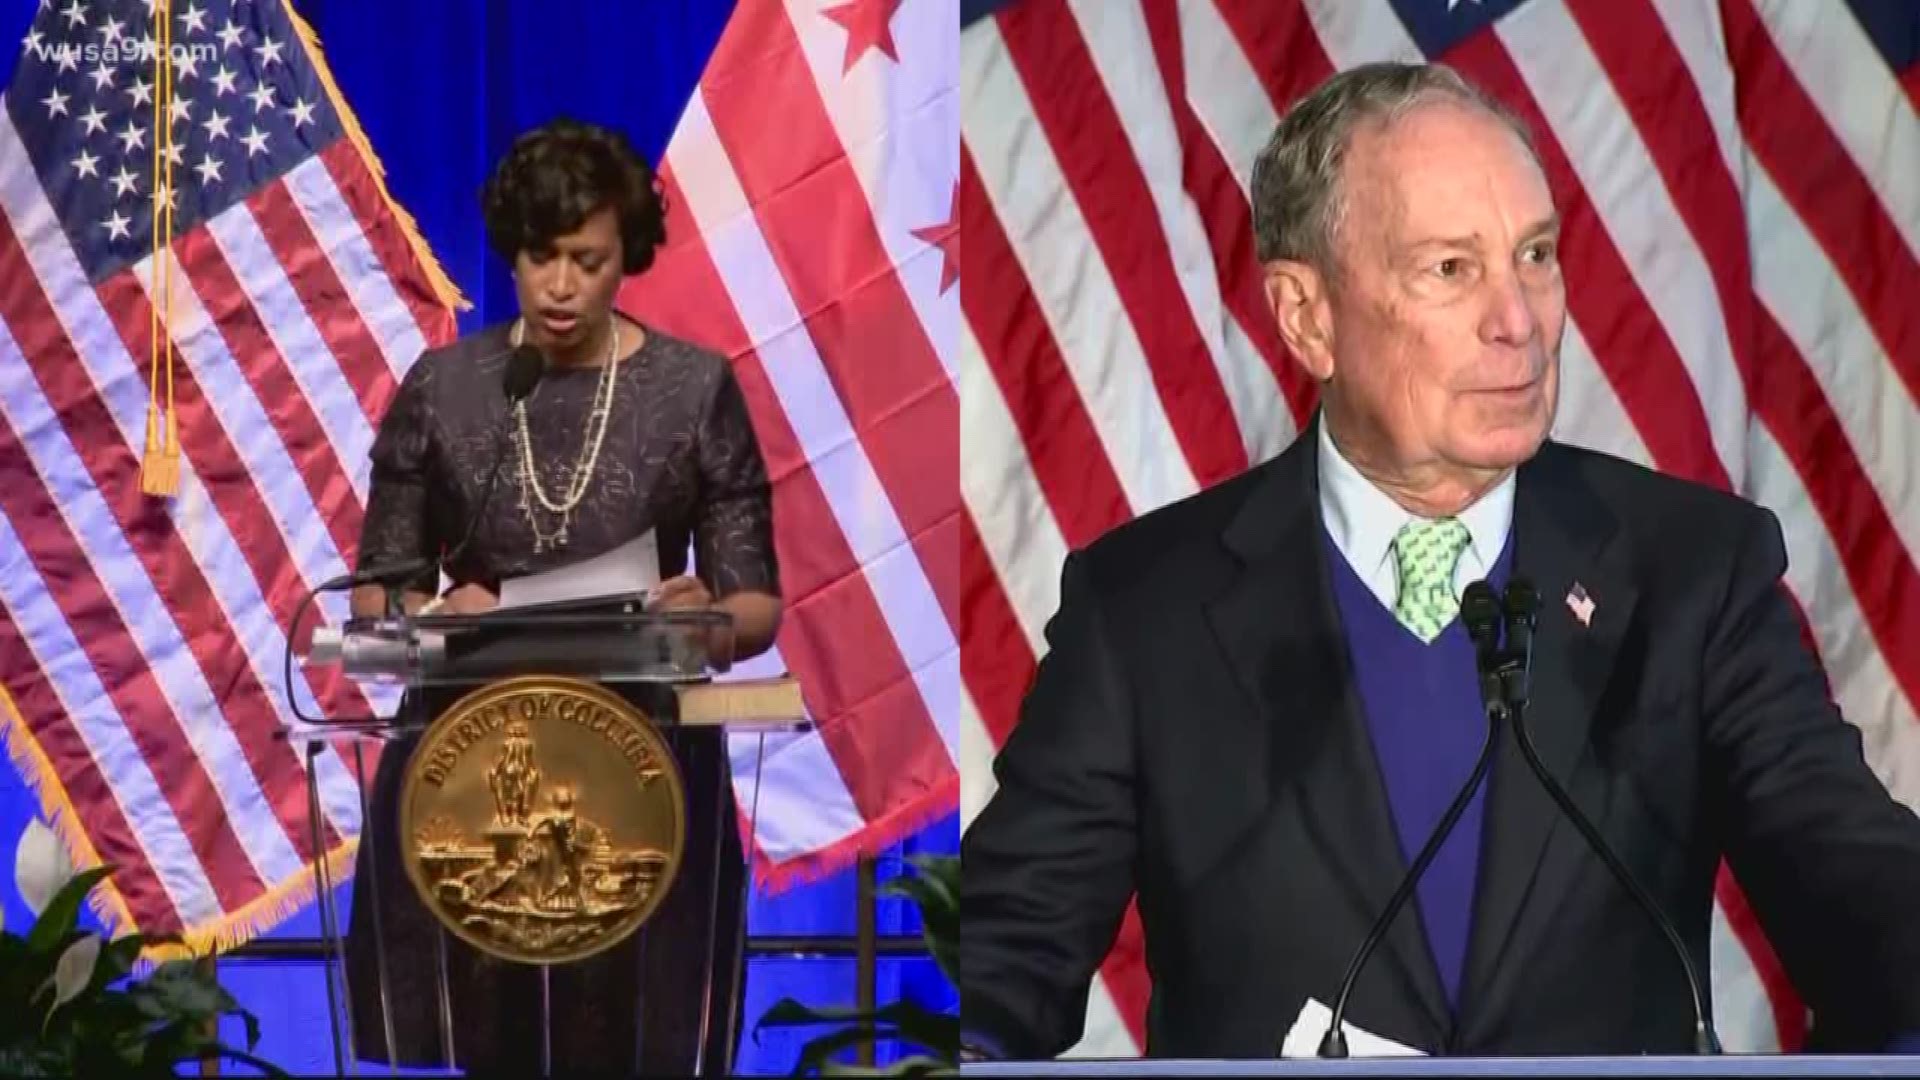 D.C. Mayor Muriel Bowser has endorsed presidential candidate Michael Bloomberg.